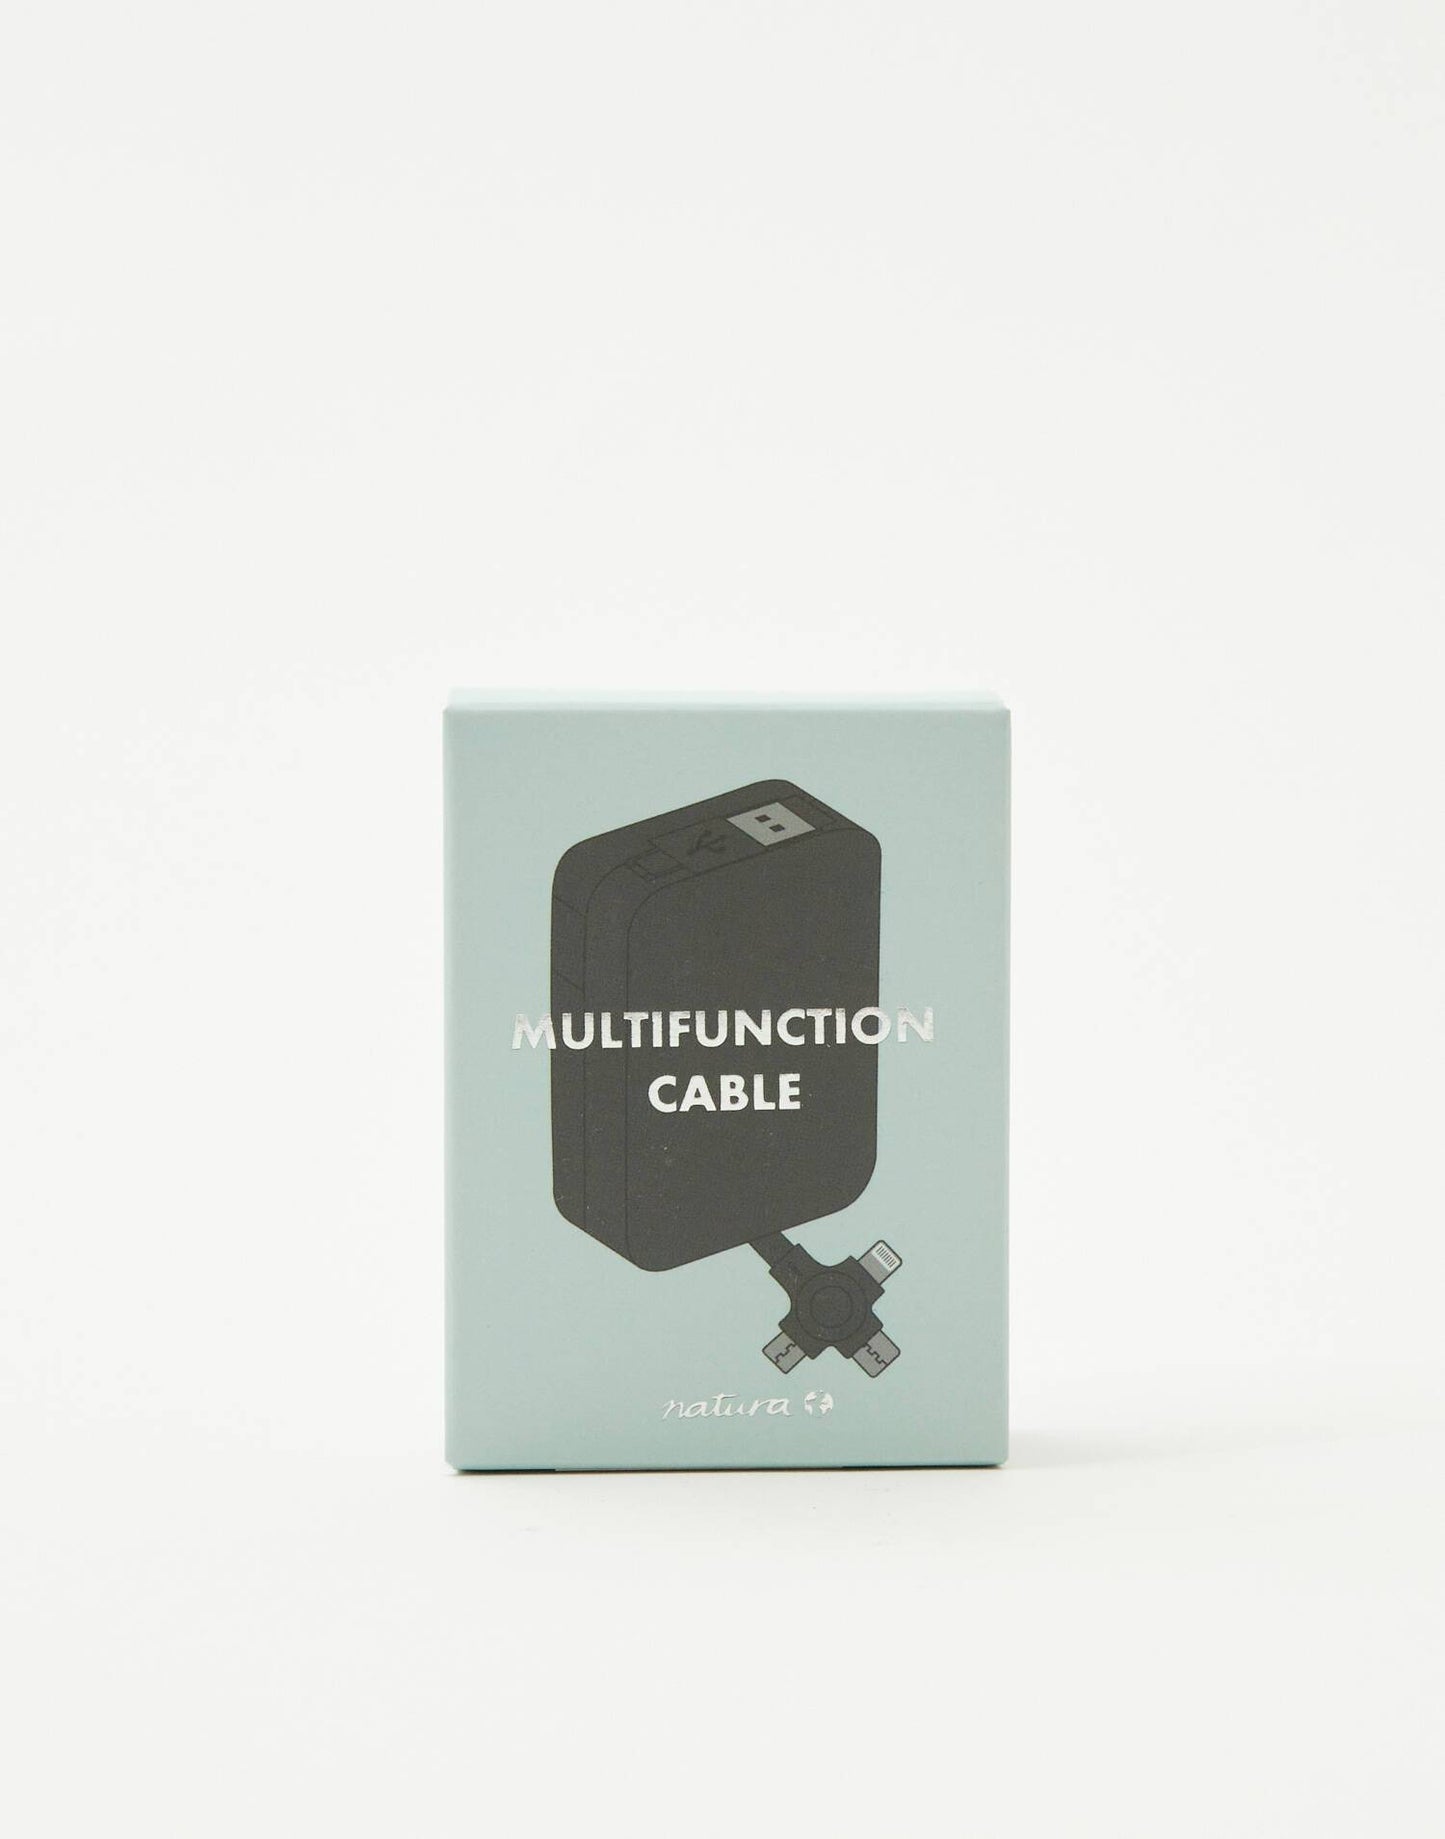 Multifunction cable